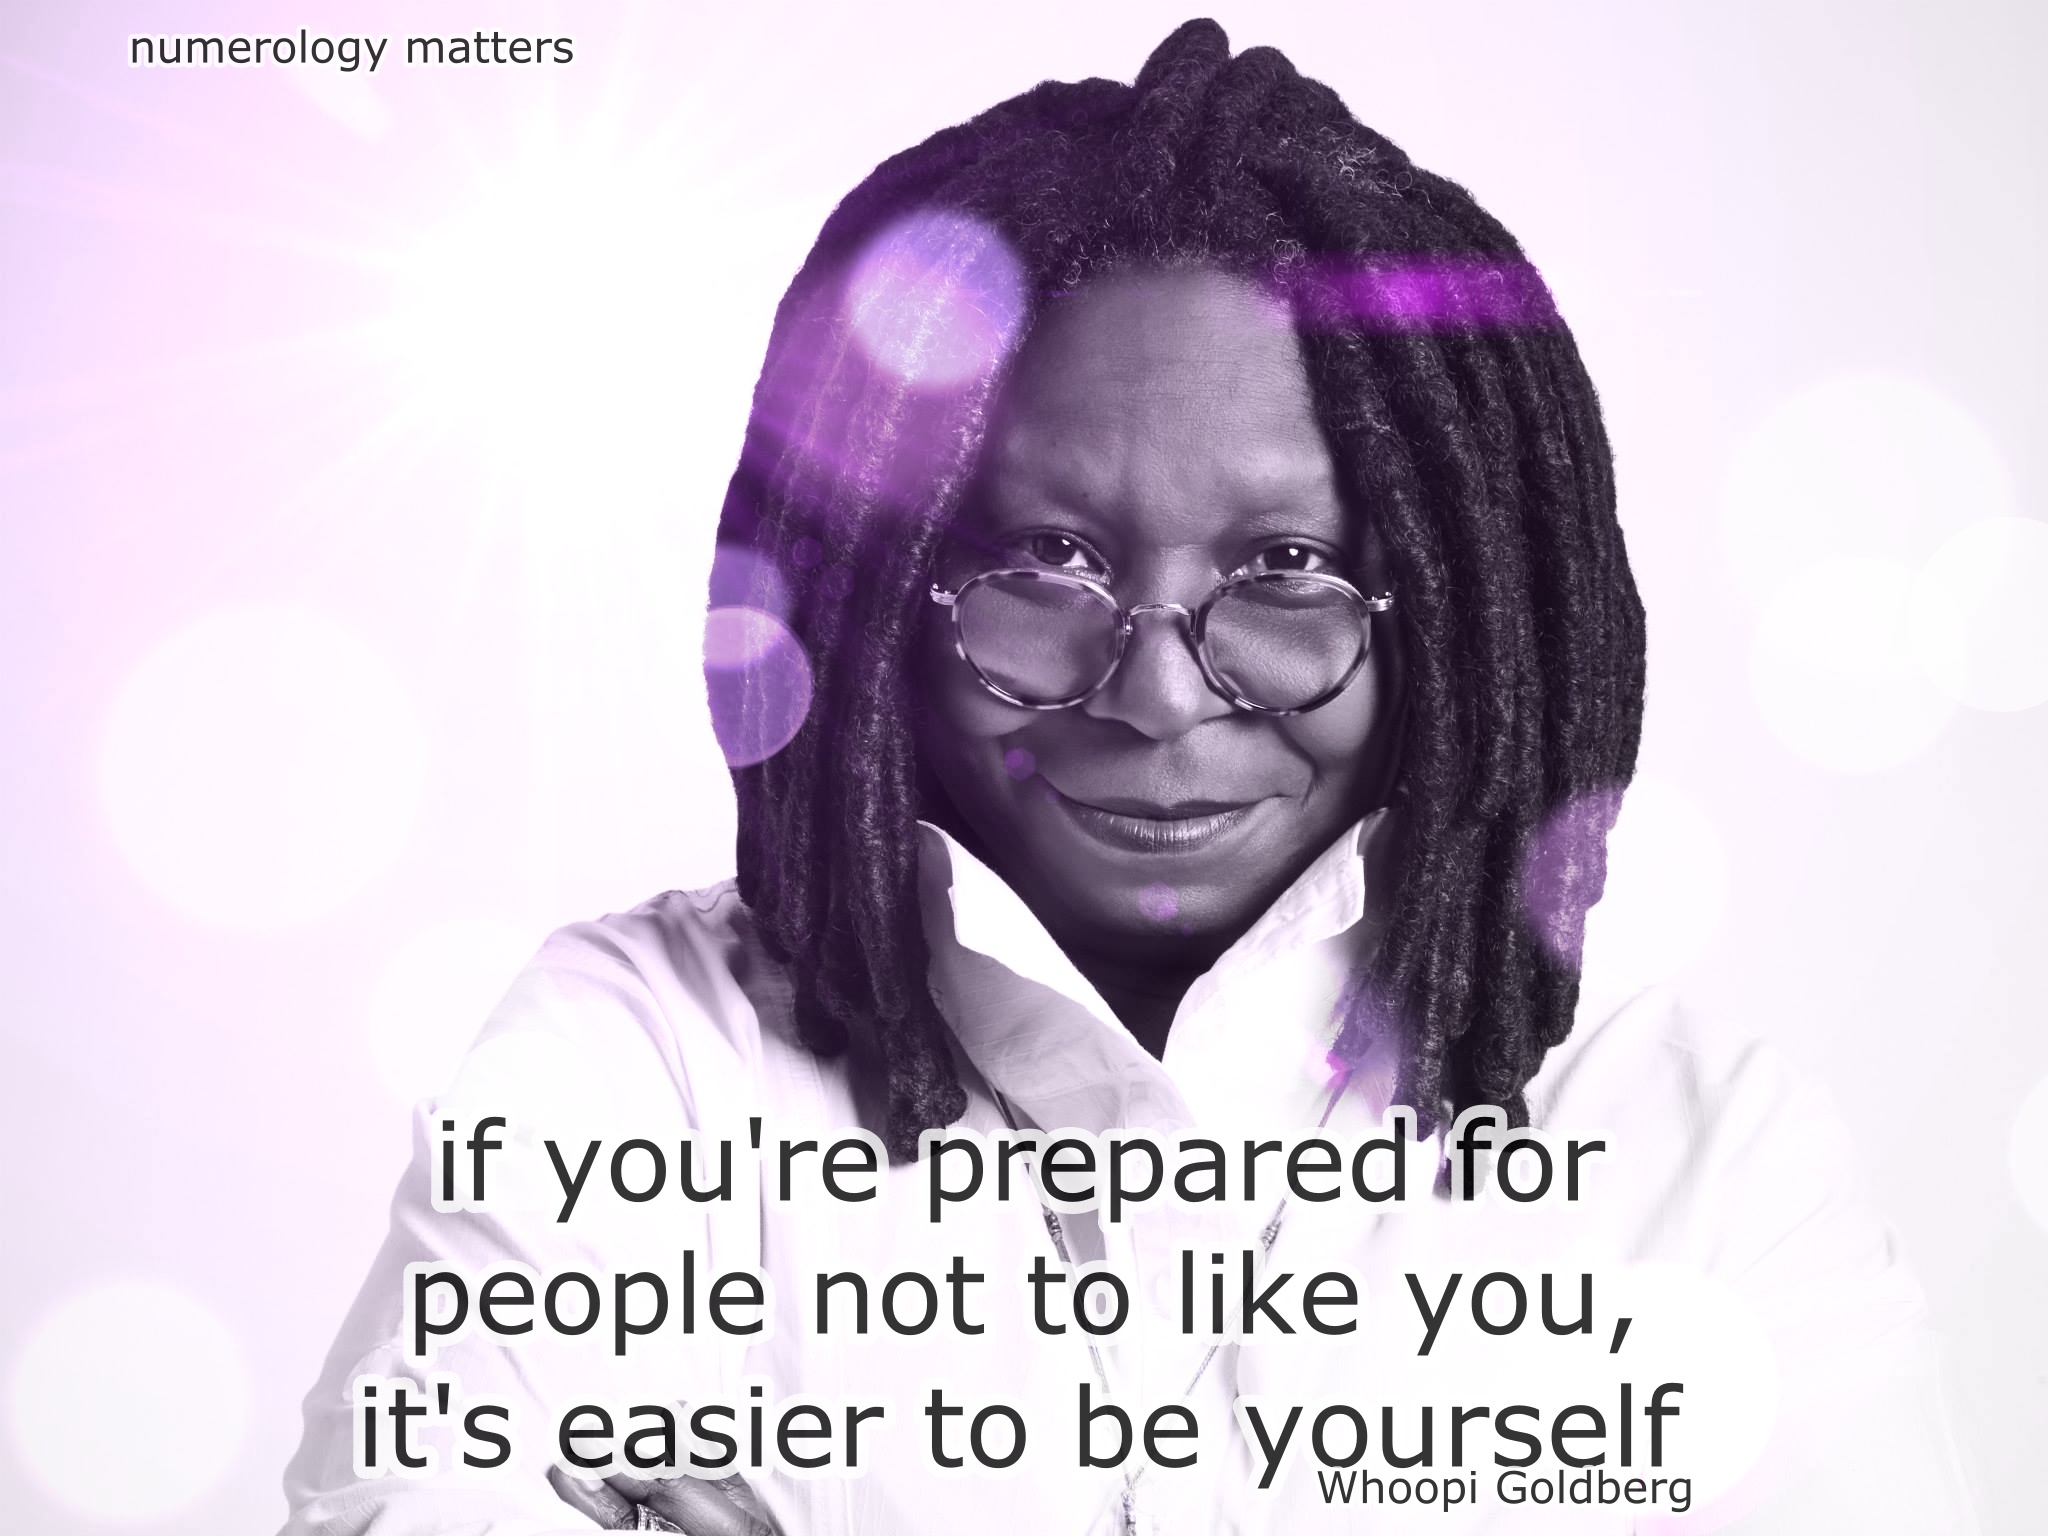 whoopi its okay to feel different than the pack thats a fundamental right Whoopie https:www.facebook.com:pages:Timothy-White:432703116800141